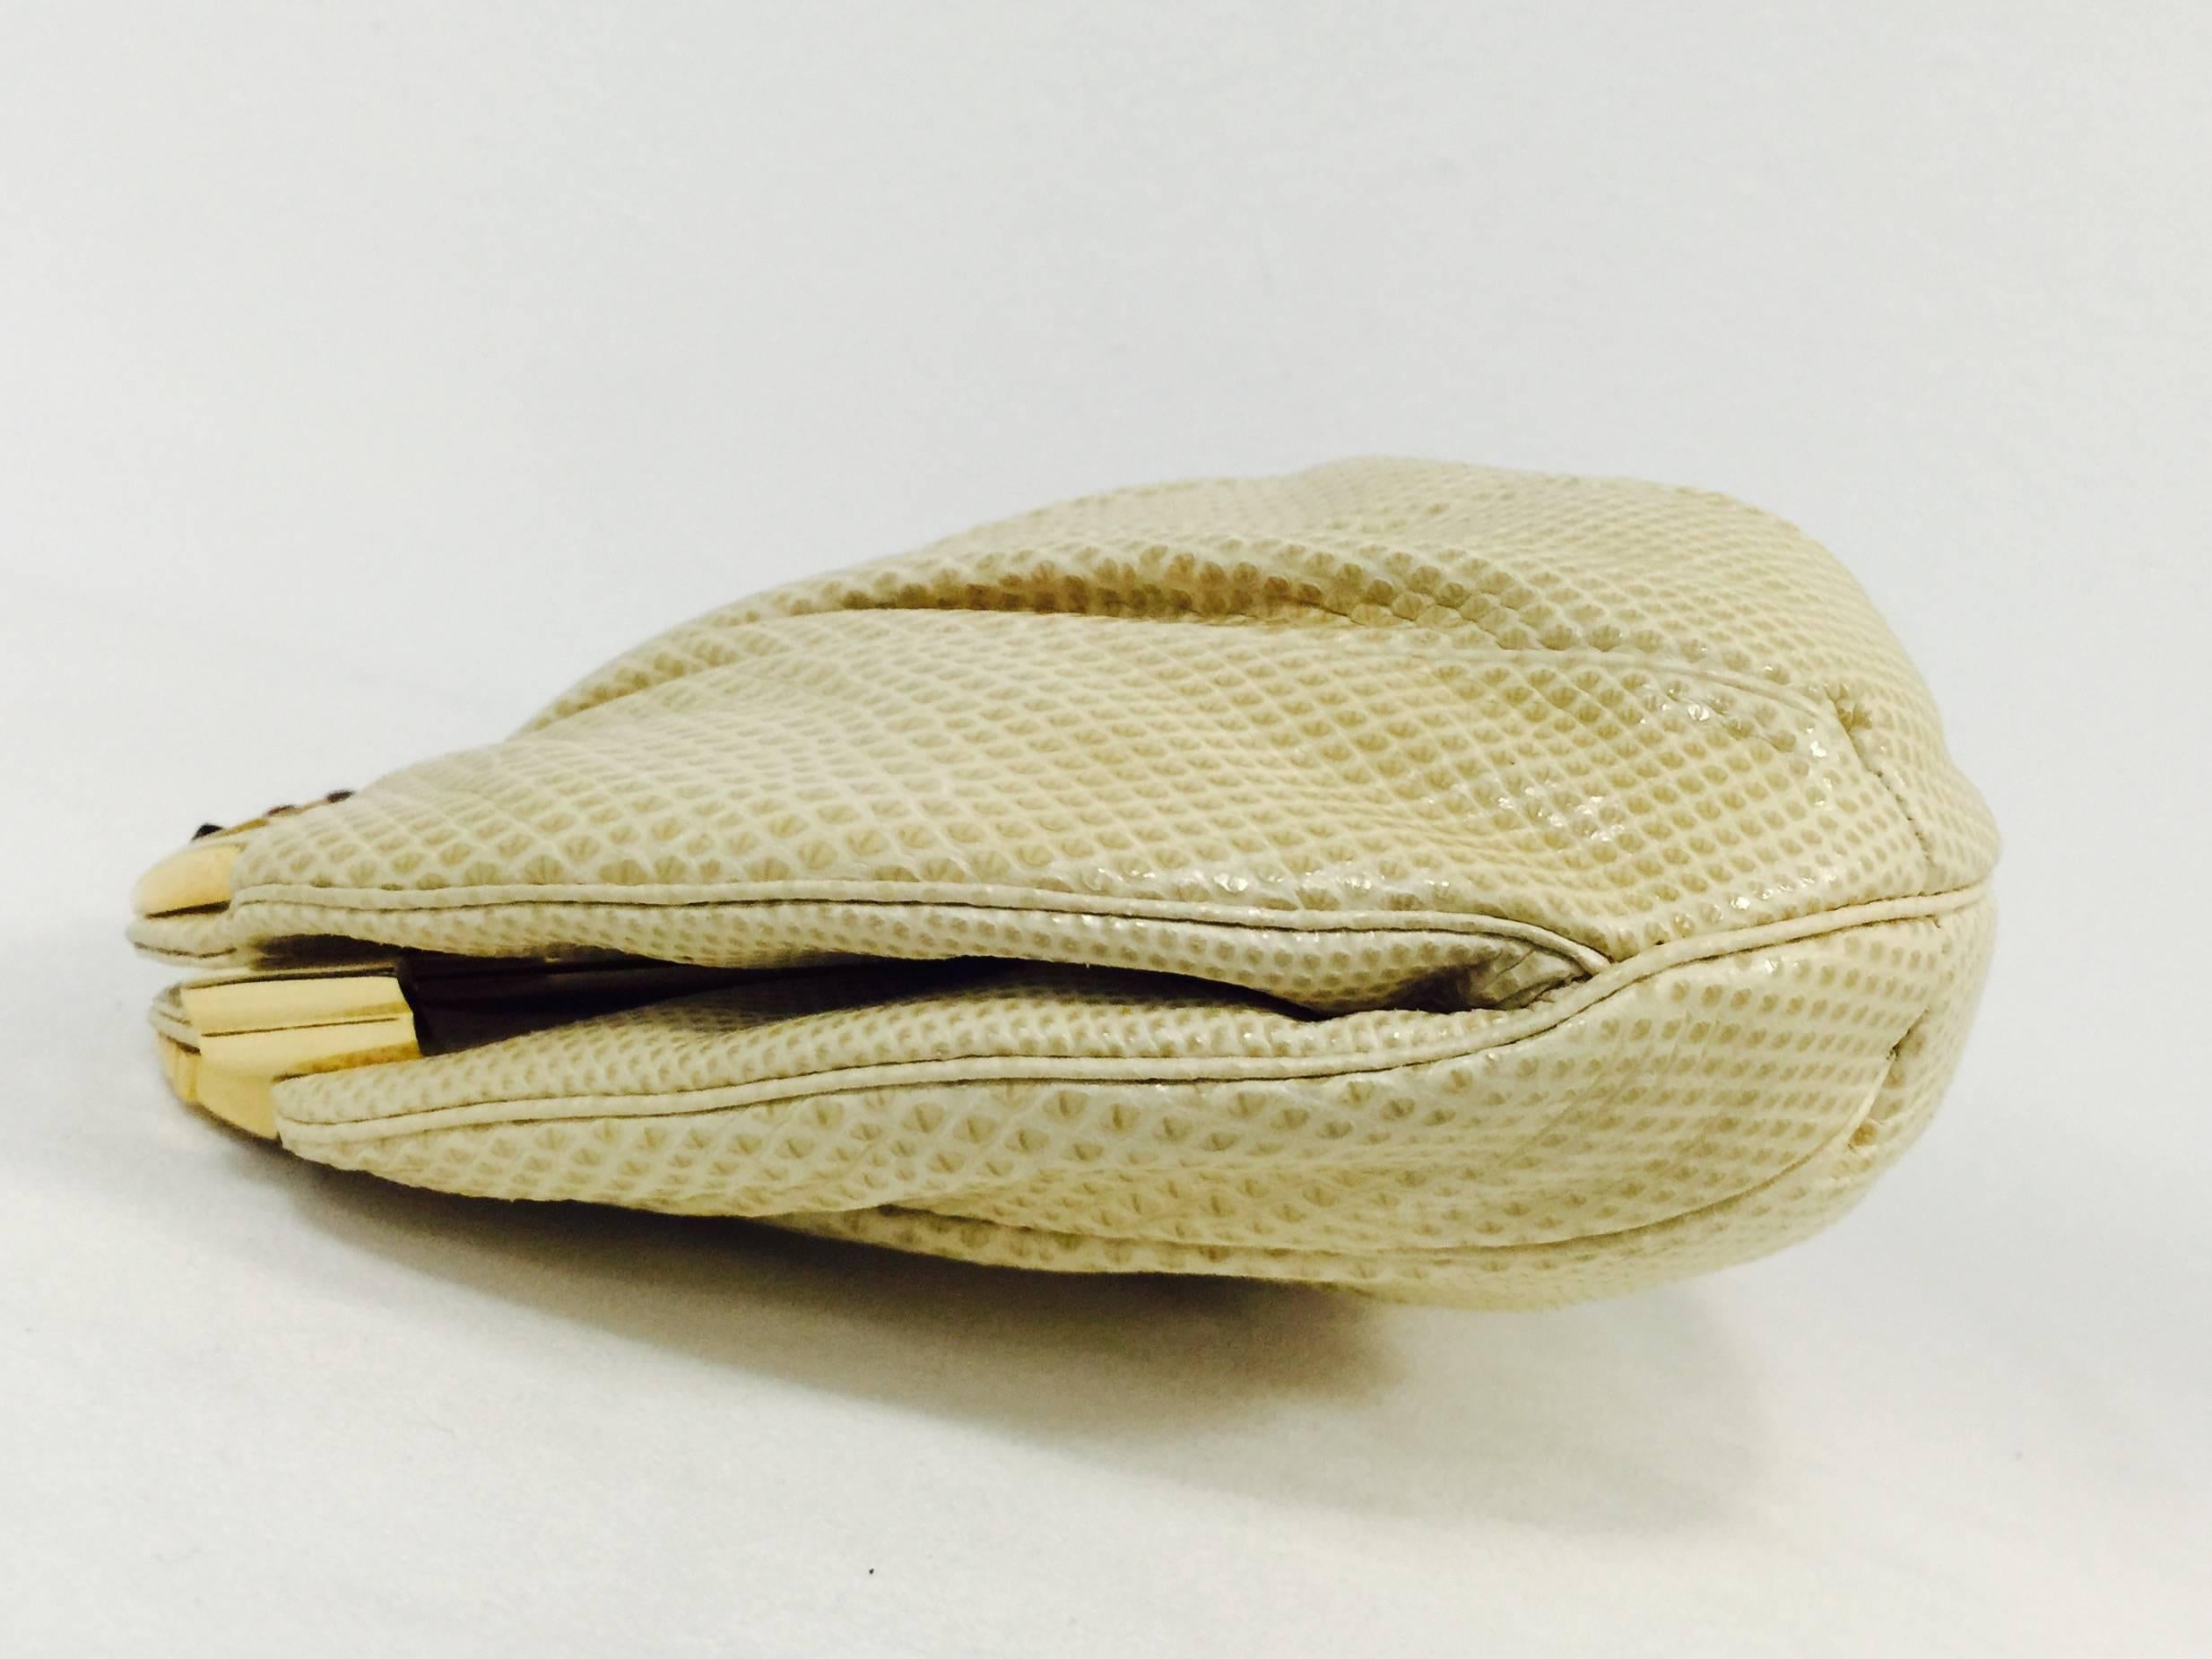 Vintage Judith Leiber Bejeweled Tan Lizard Convertible Clutch is highly desired by all collectors of Judith Leiber! Features slightly gathered, butter-soft lizard skin. Larger than the typical Leiber bag, easily converts from clutch to shoulder bag